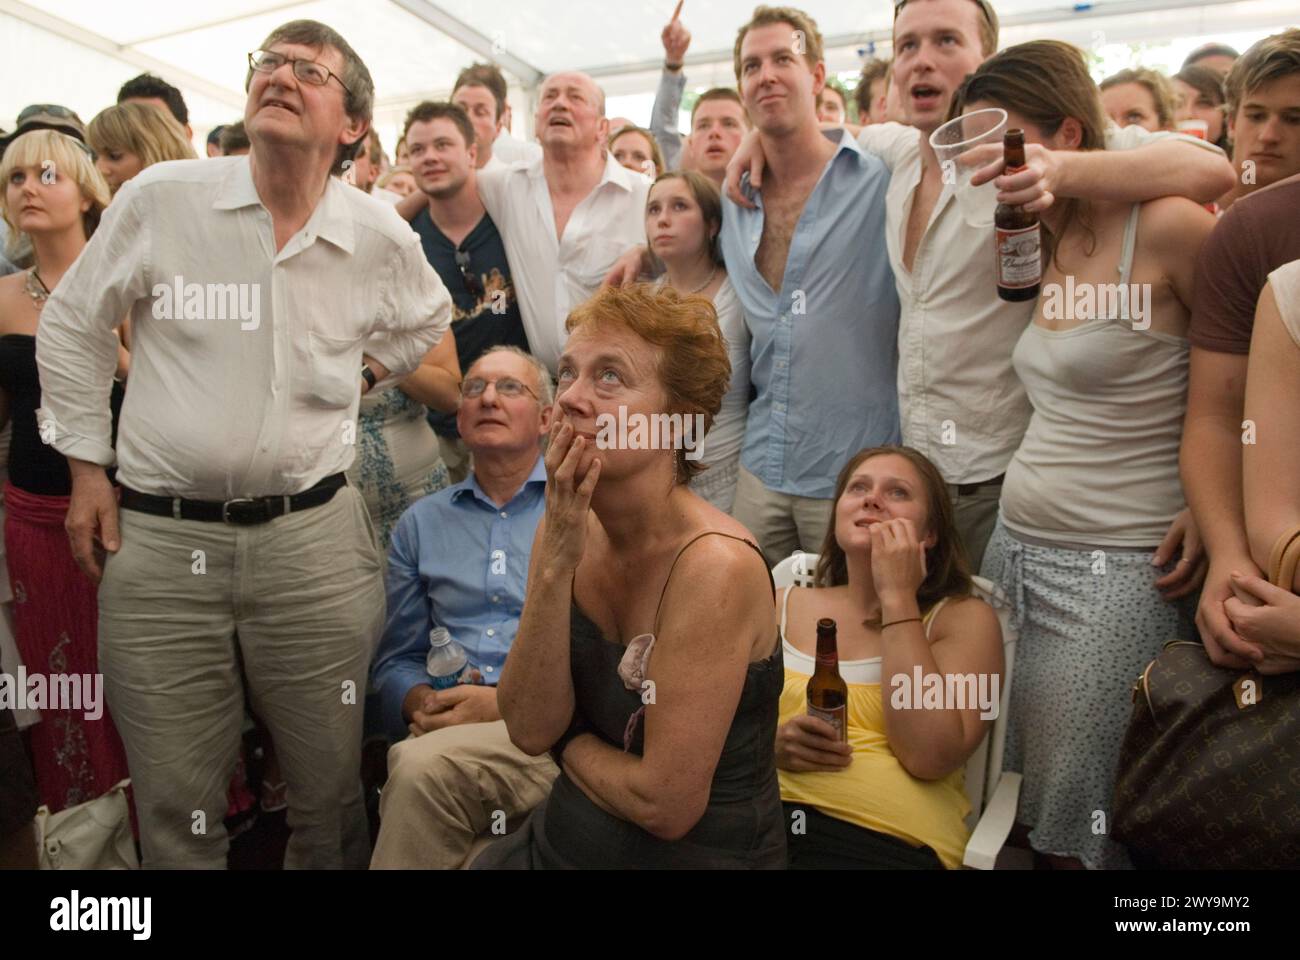 World Cup Football 2006. England v Portugal. The penalty shoot out England went on to lose. Fans photographed in beer tent marquee watching the football game on specially erected televisions sets. Oxfordshire UK 2000s HOMER SYKES. Stock Photo